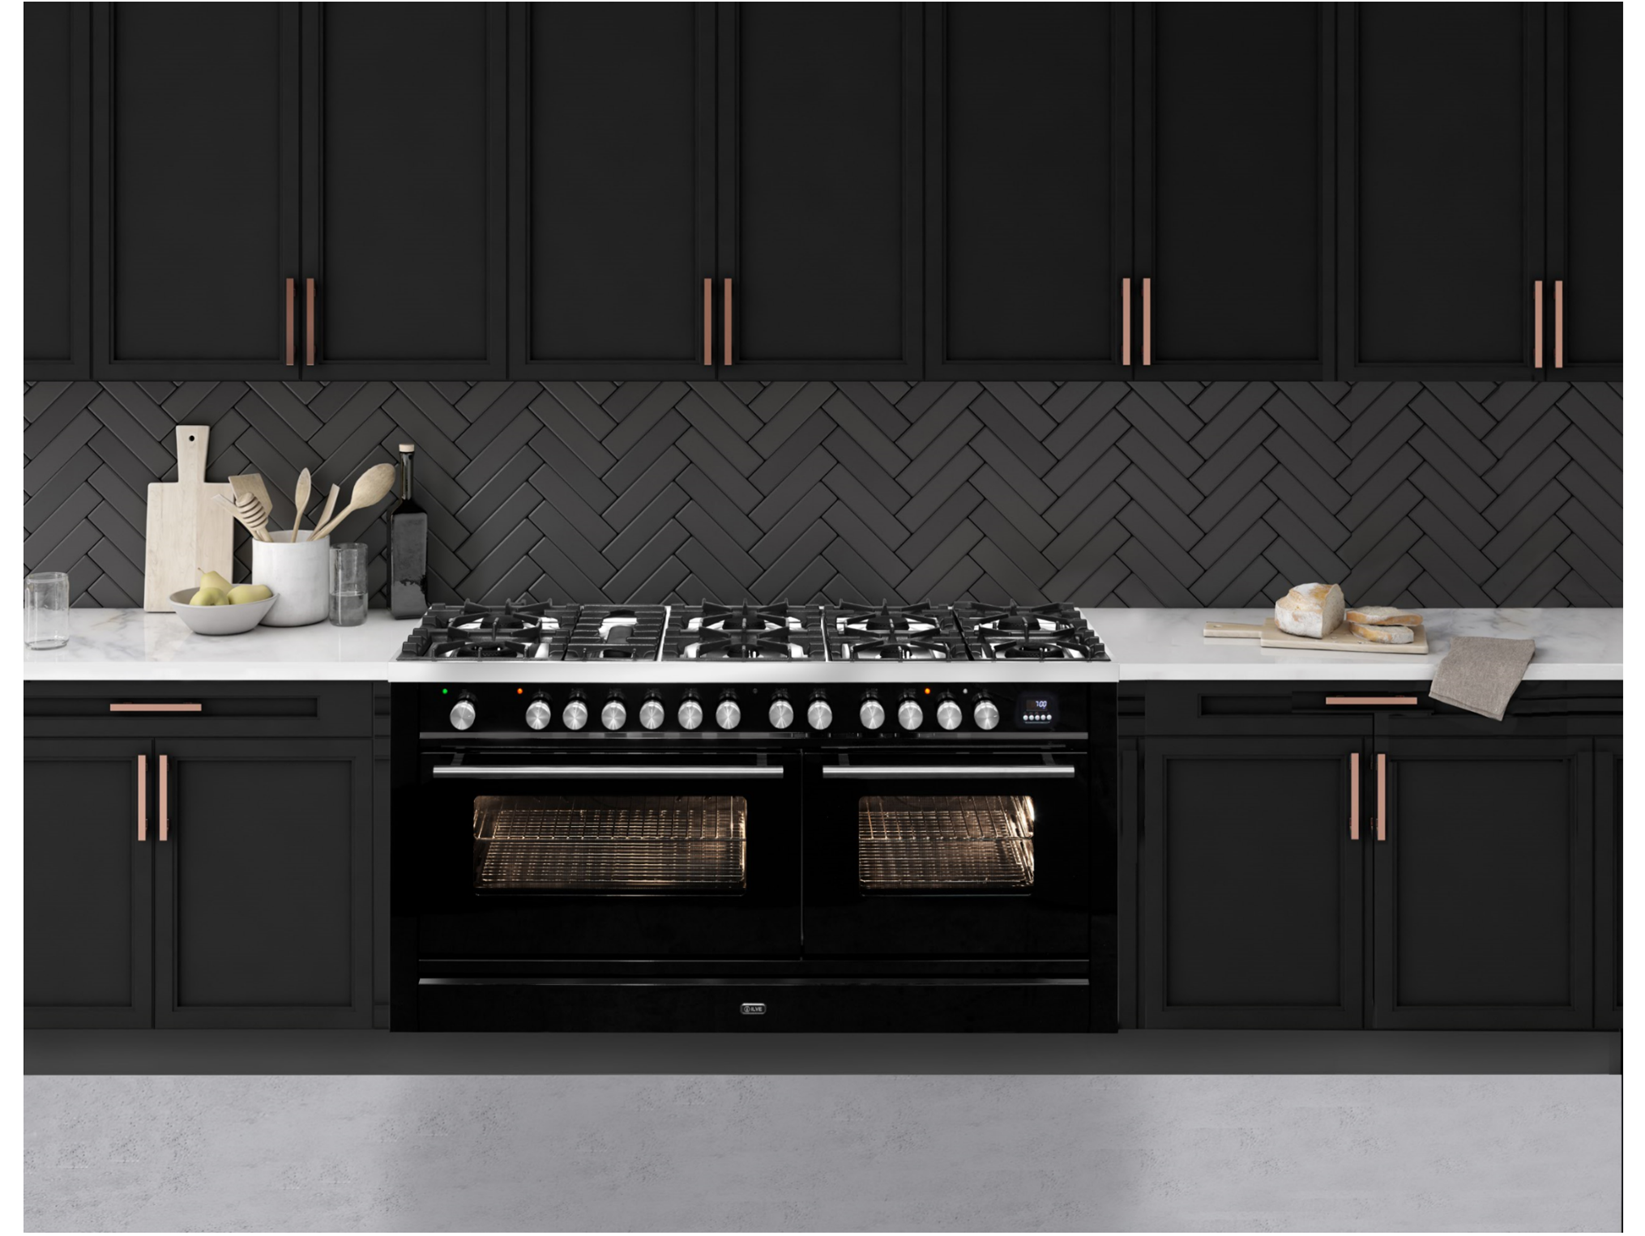 Save Up To 40% Off Selected ILVE Built-In Ovens, Cooktops & Rangehoods* at Hart & Co